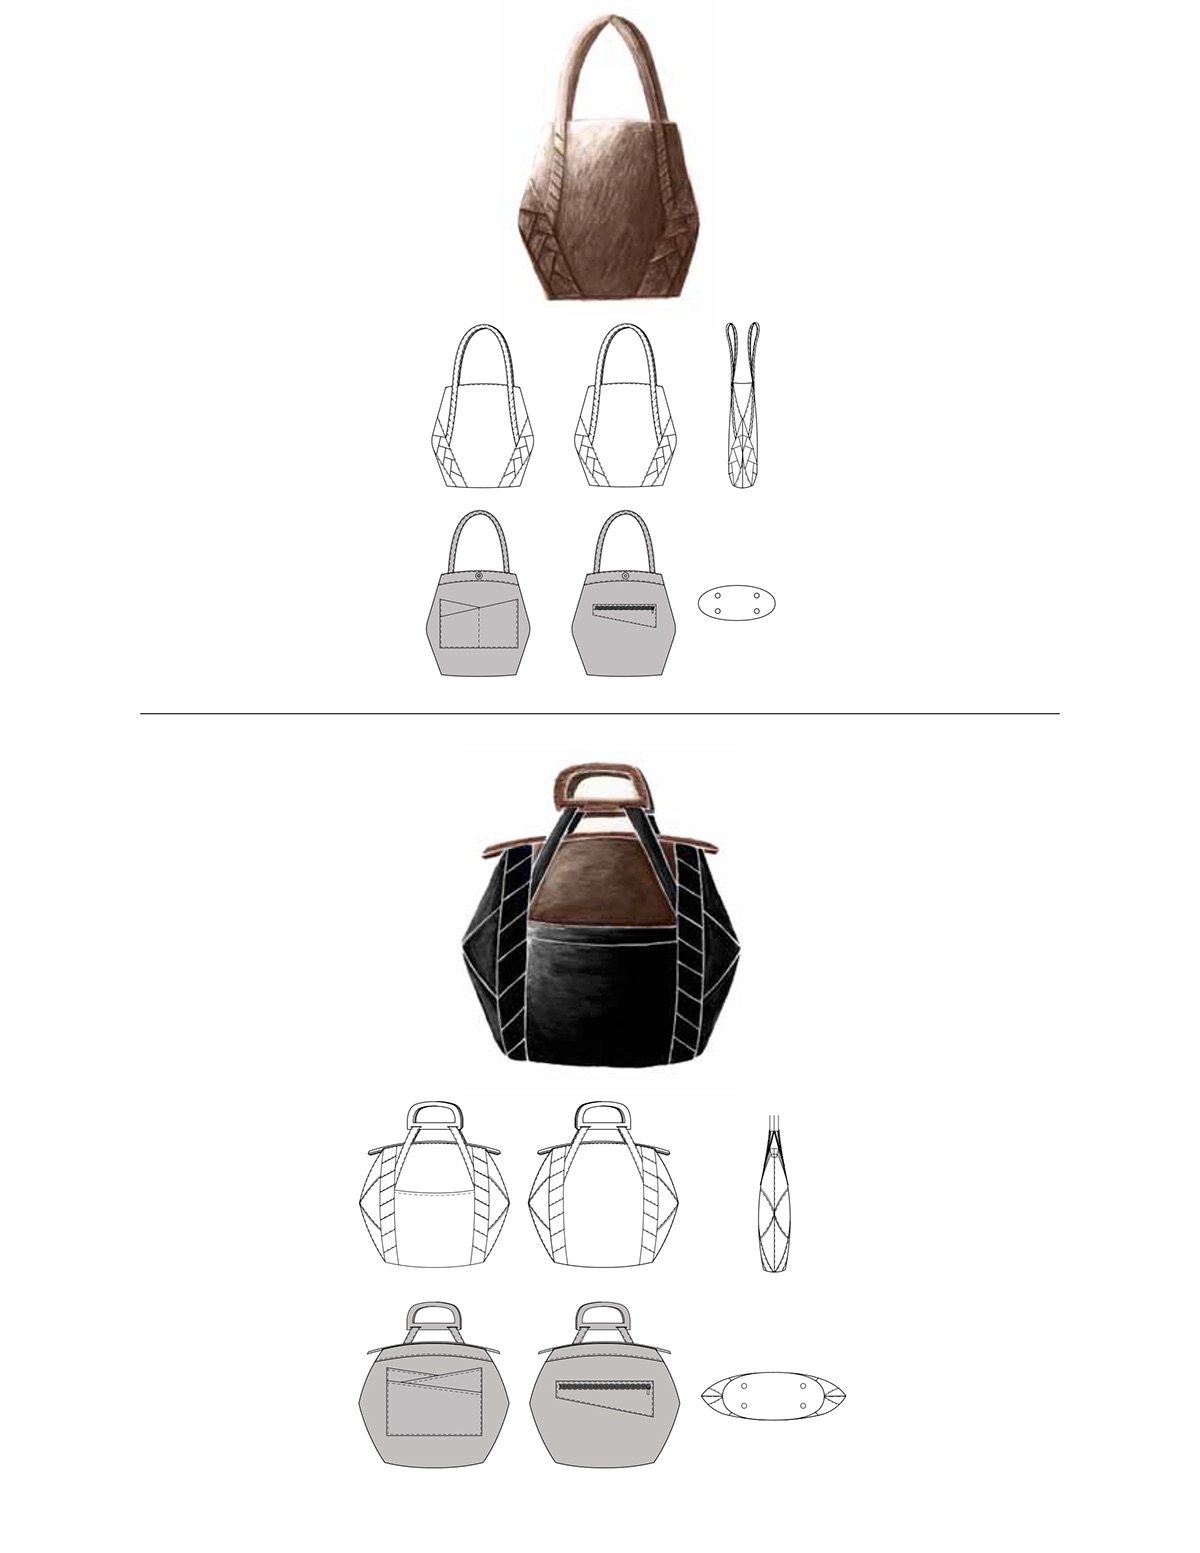 accessory design Handbag Design Hand Illustrations Technical Drawings industrial sewing sewing construction